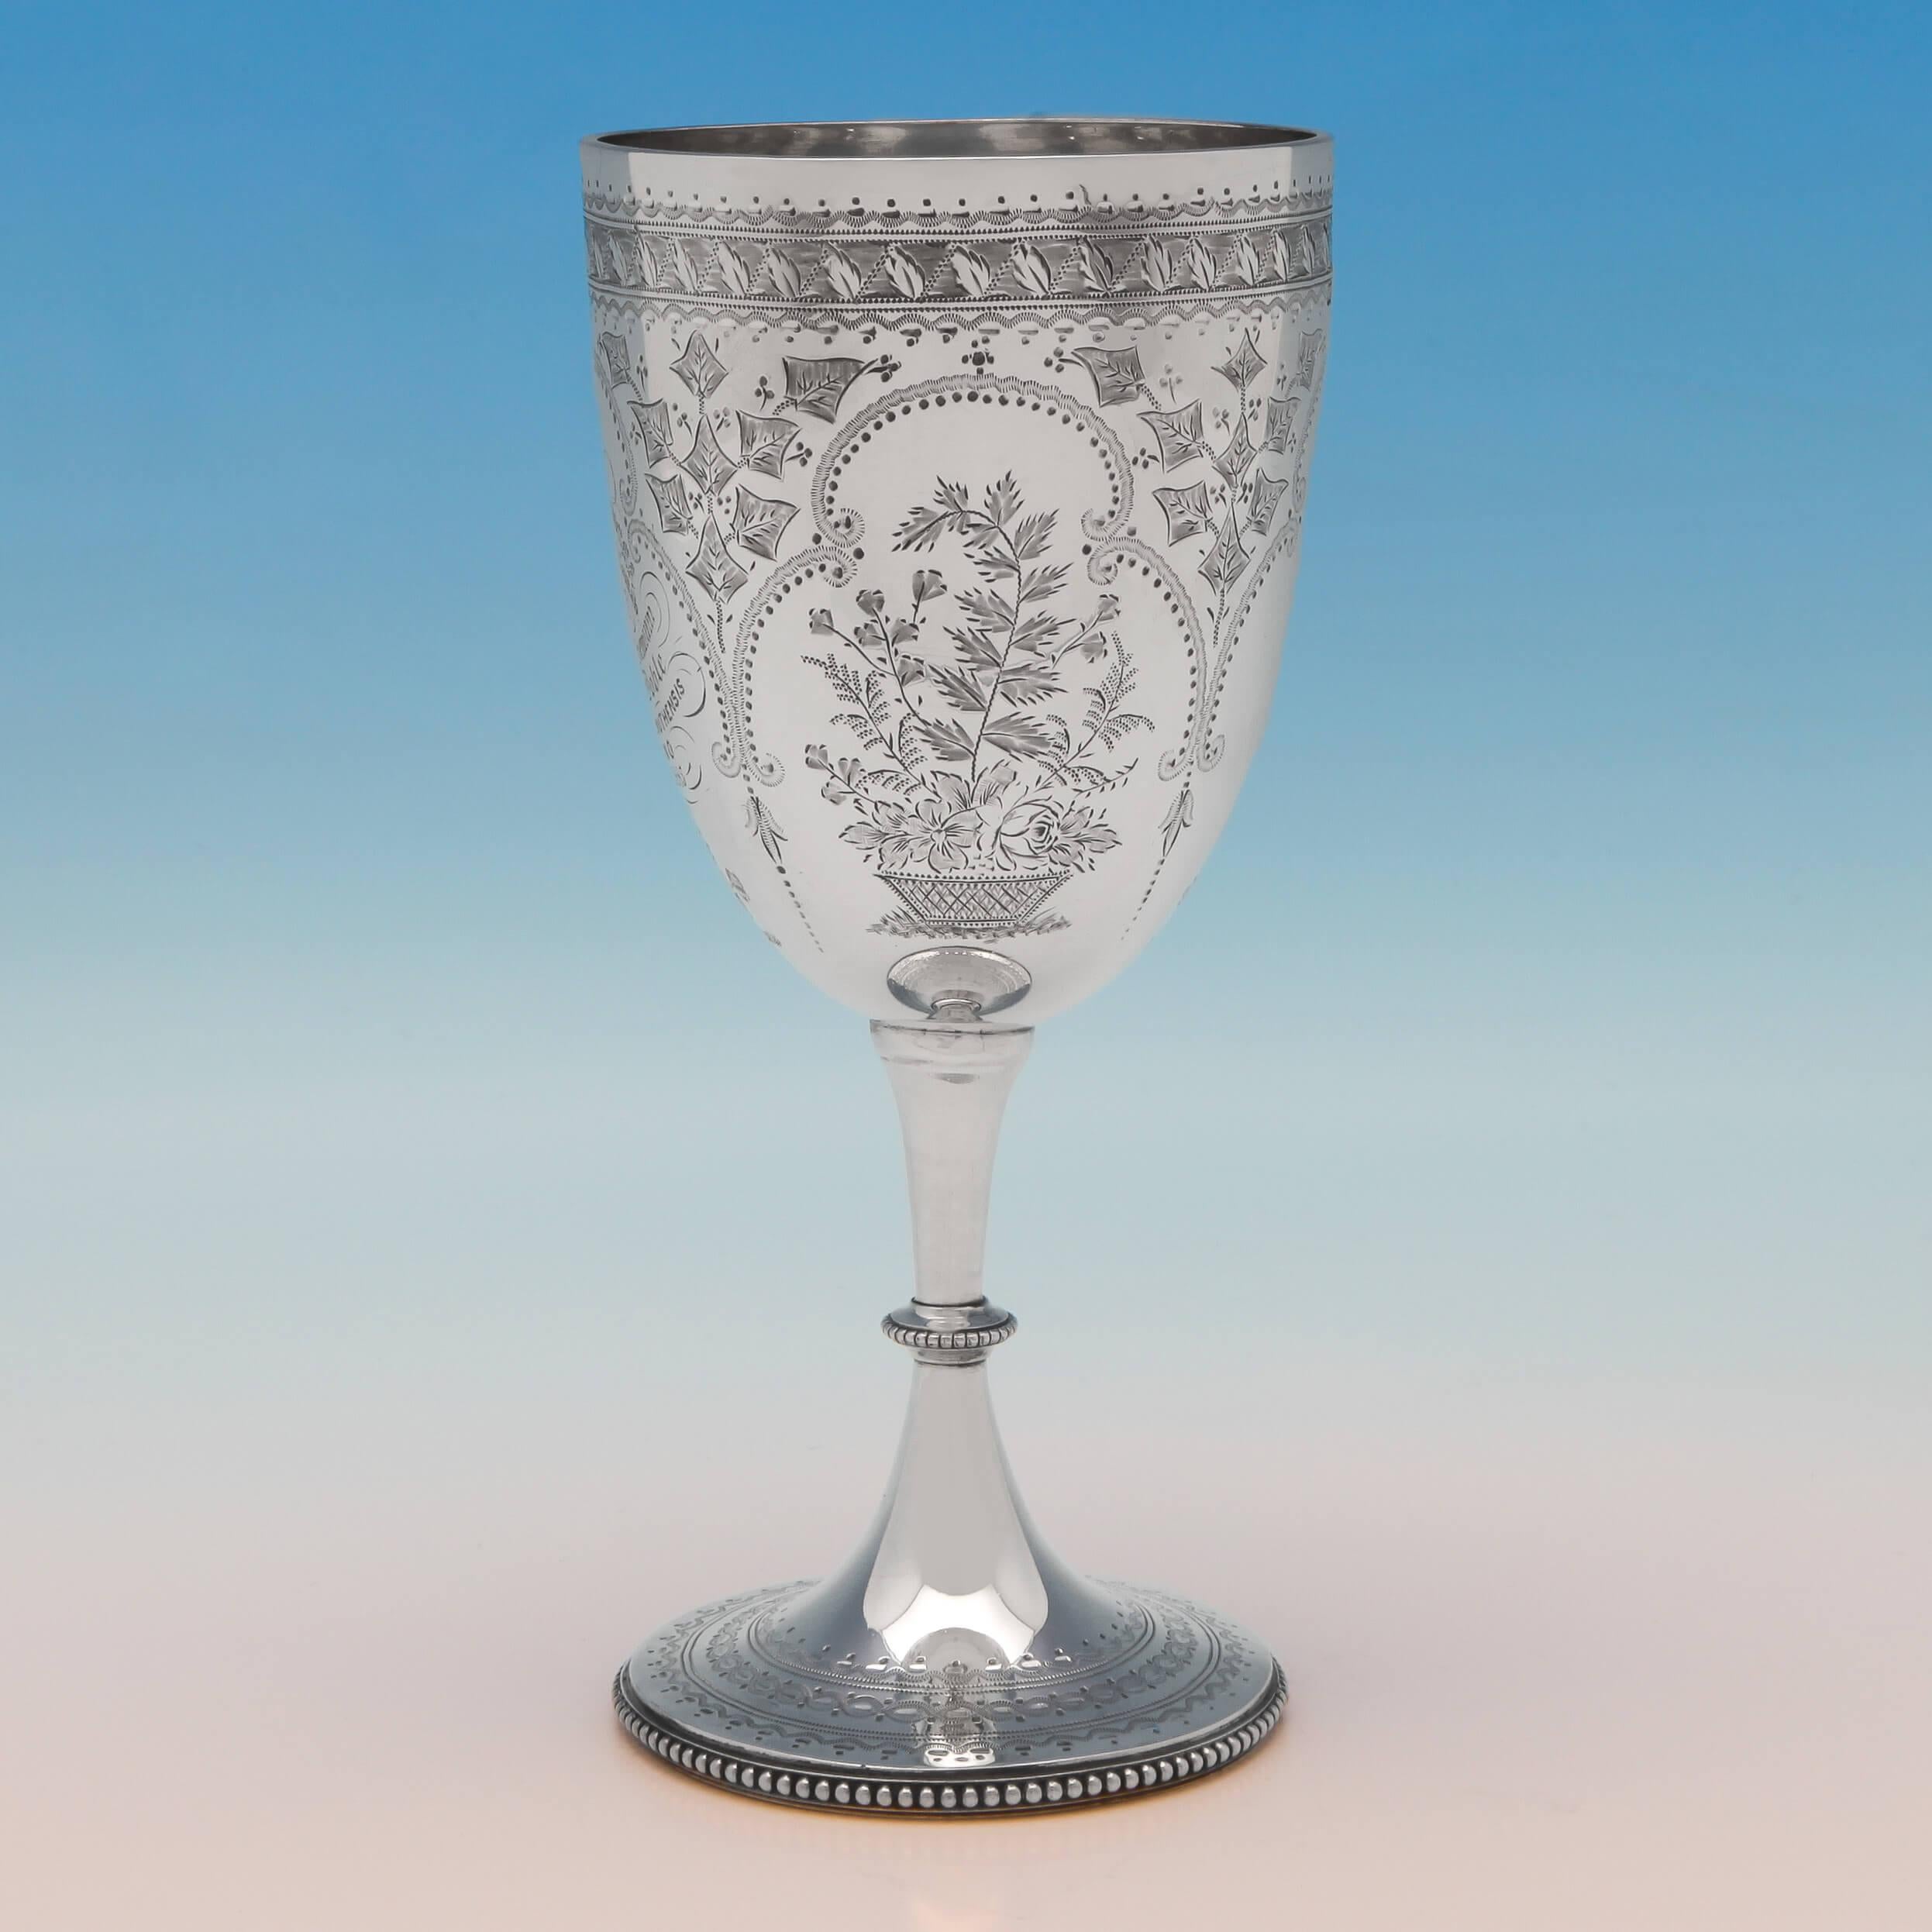 Hallmarked in London in 1874 by Elkington & Co., this, very attractive, Victorian, antique, sterling silver goblet, features naturalistic engraving, bead borders, and an original engraved inscription which reads “Rev. I. H. P. Bennett M. A. - Corp